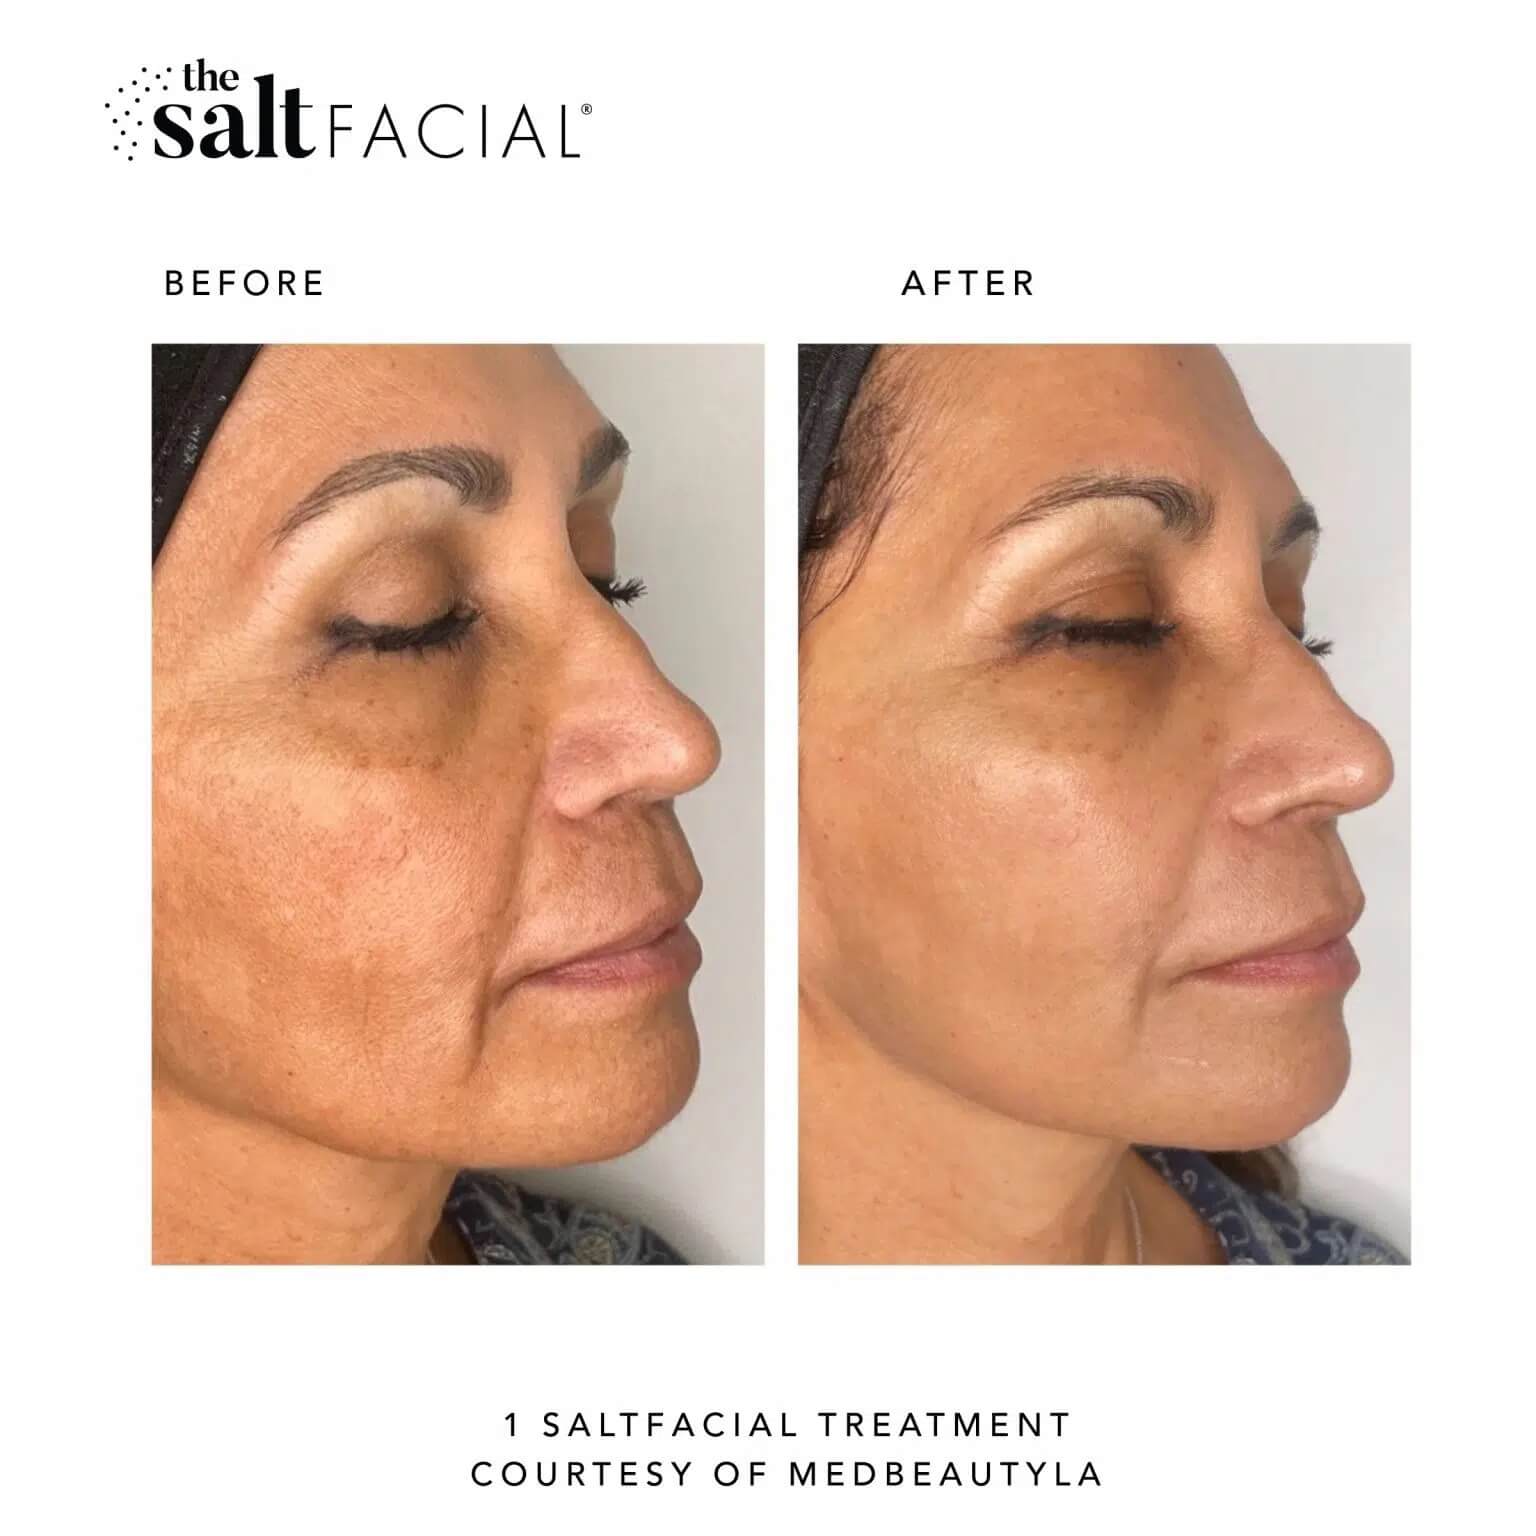 Before and After images | Sei tu bella aesthetics